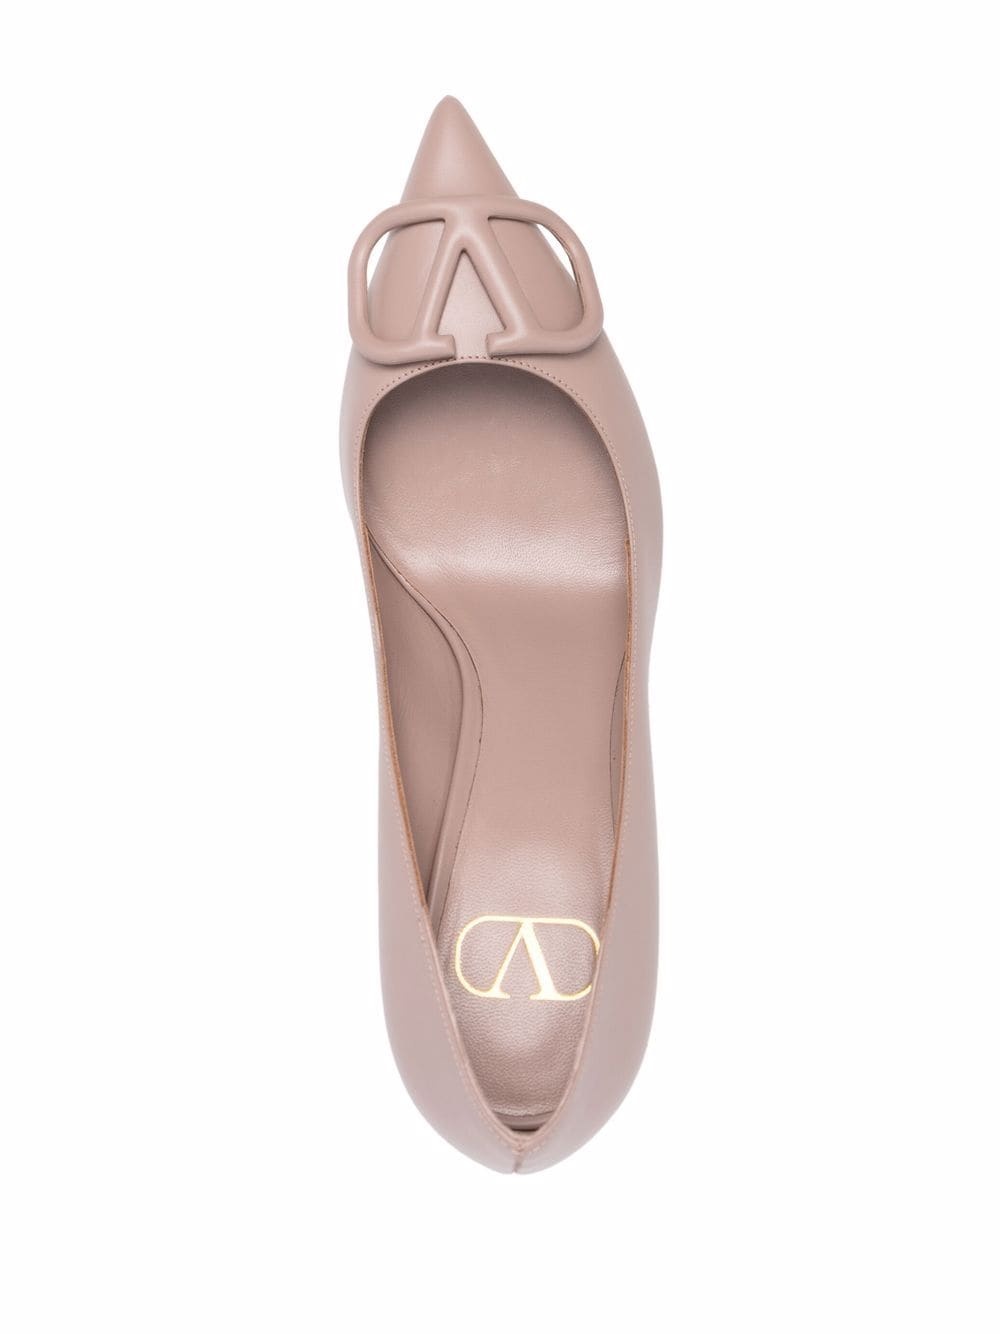 VLOGO Signature 90mm pointed pumps - 4